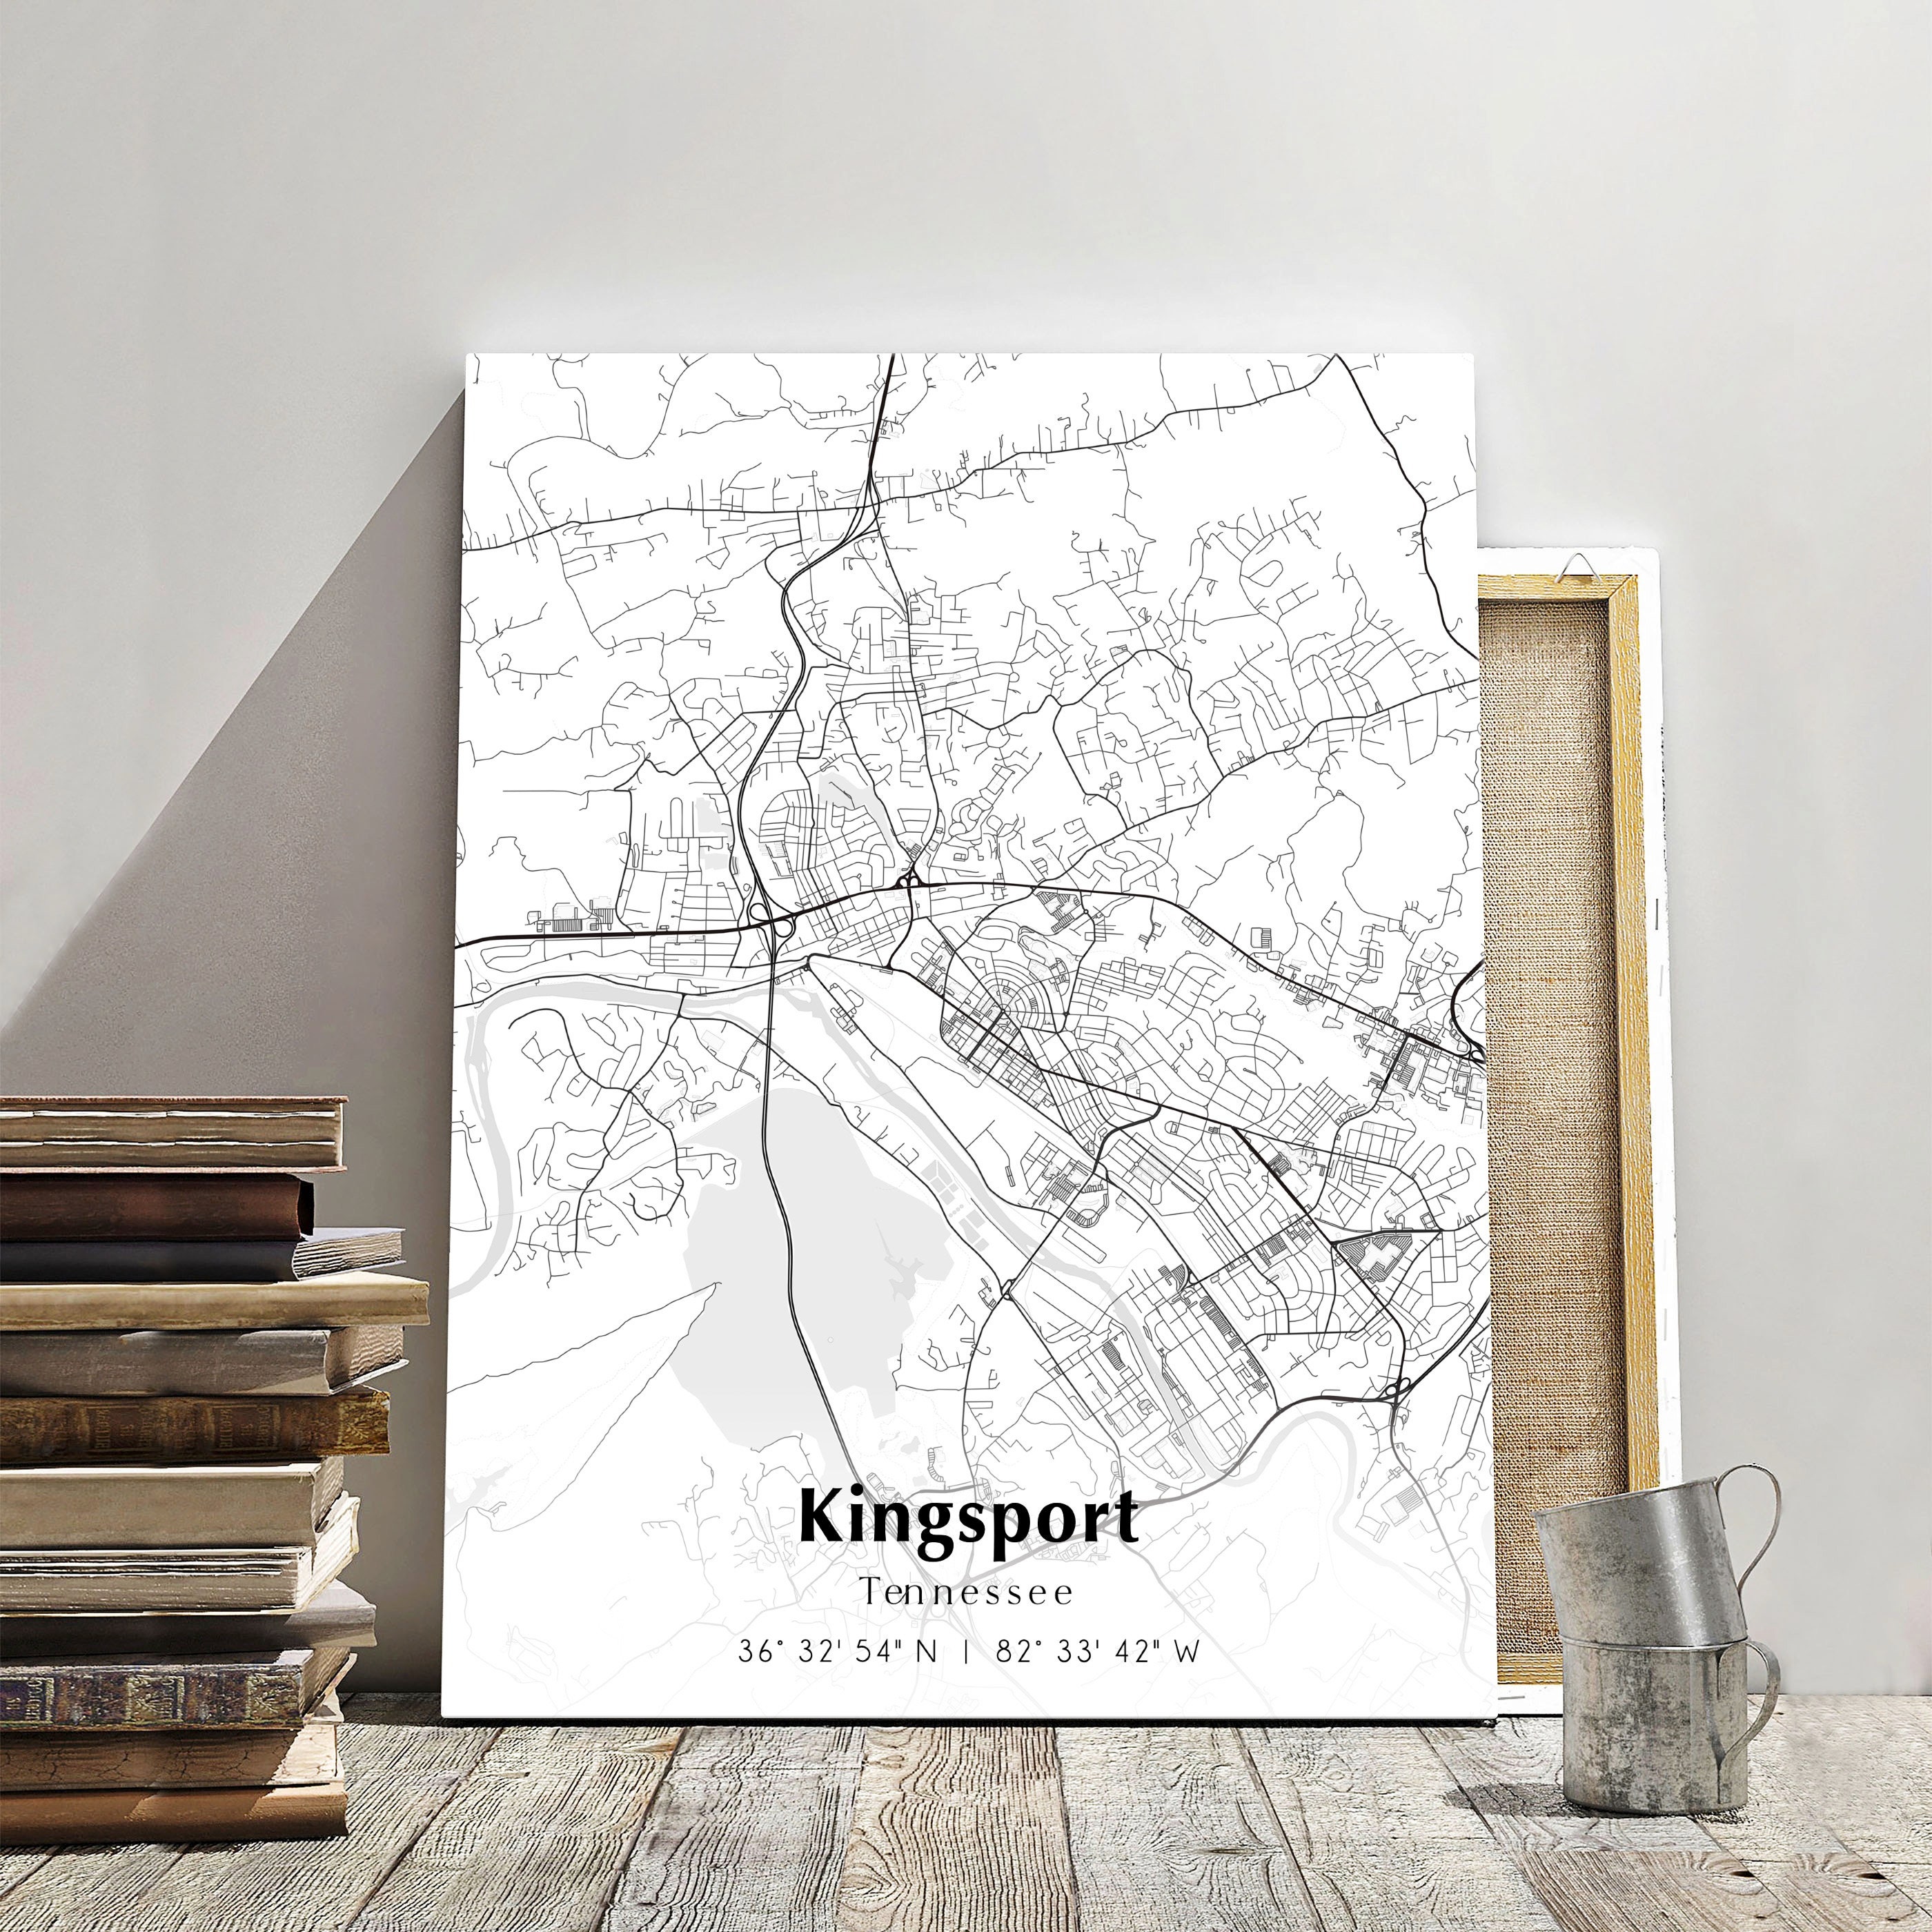 Kingsport City Map Print Kingsport Tennessee Map Poster